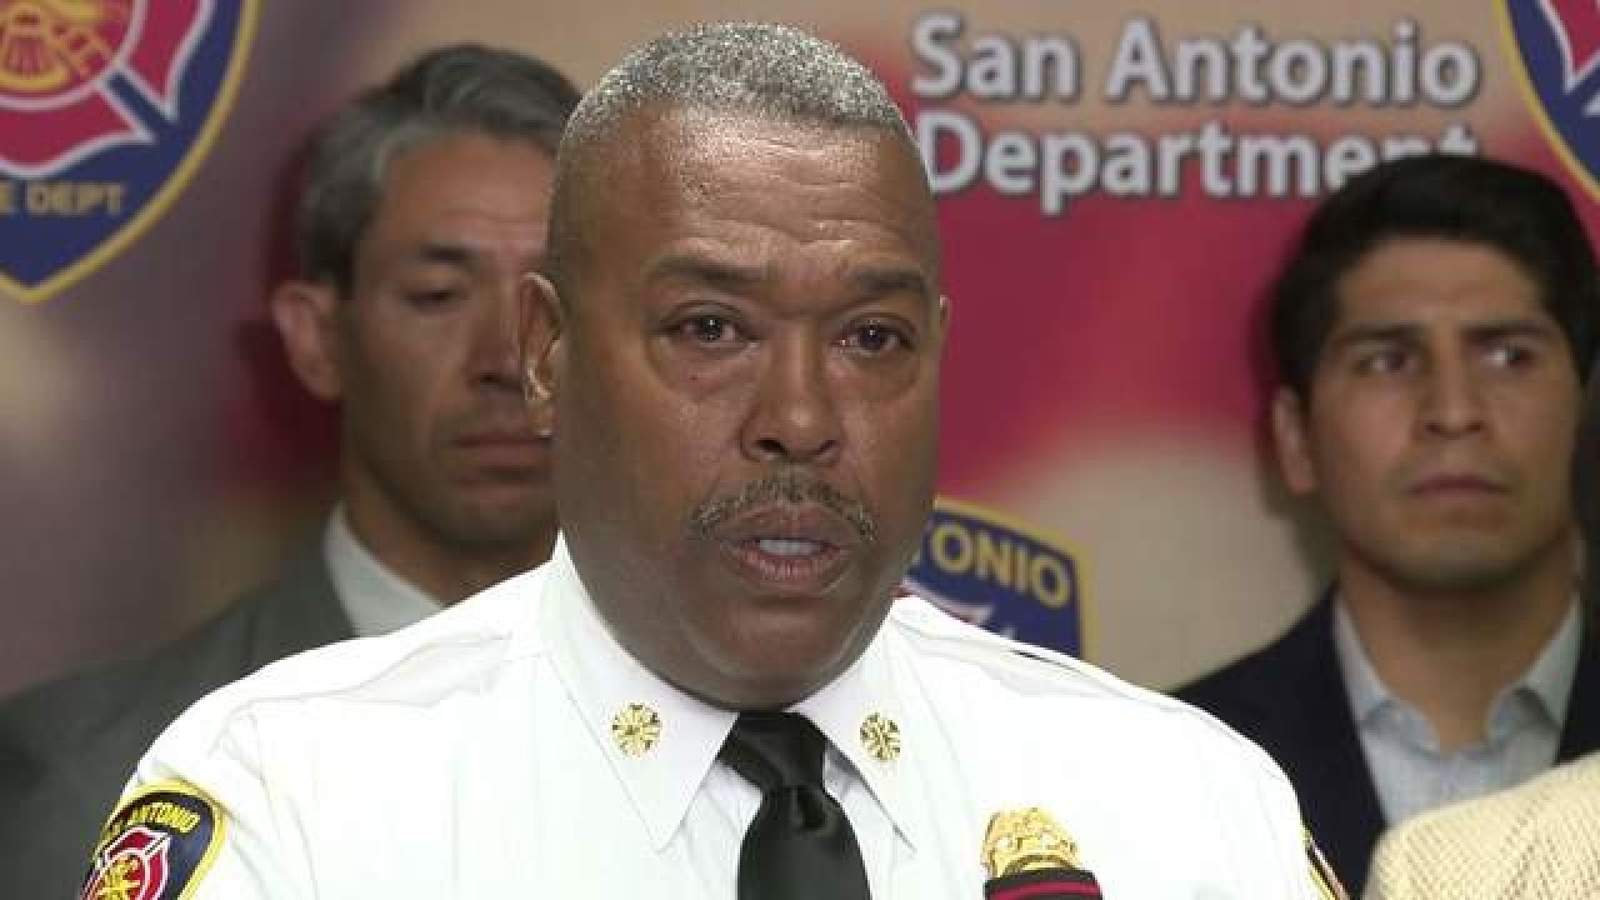 City attorney: Photo of SAFD chief eating sushi off nude woman is a ‘serious issue’ under review